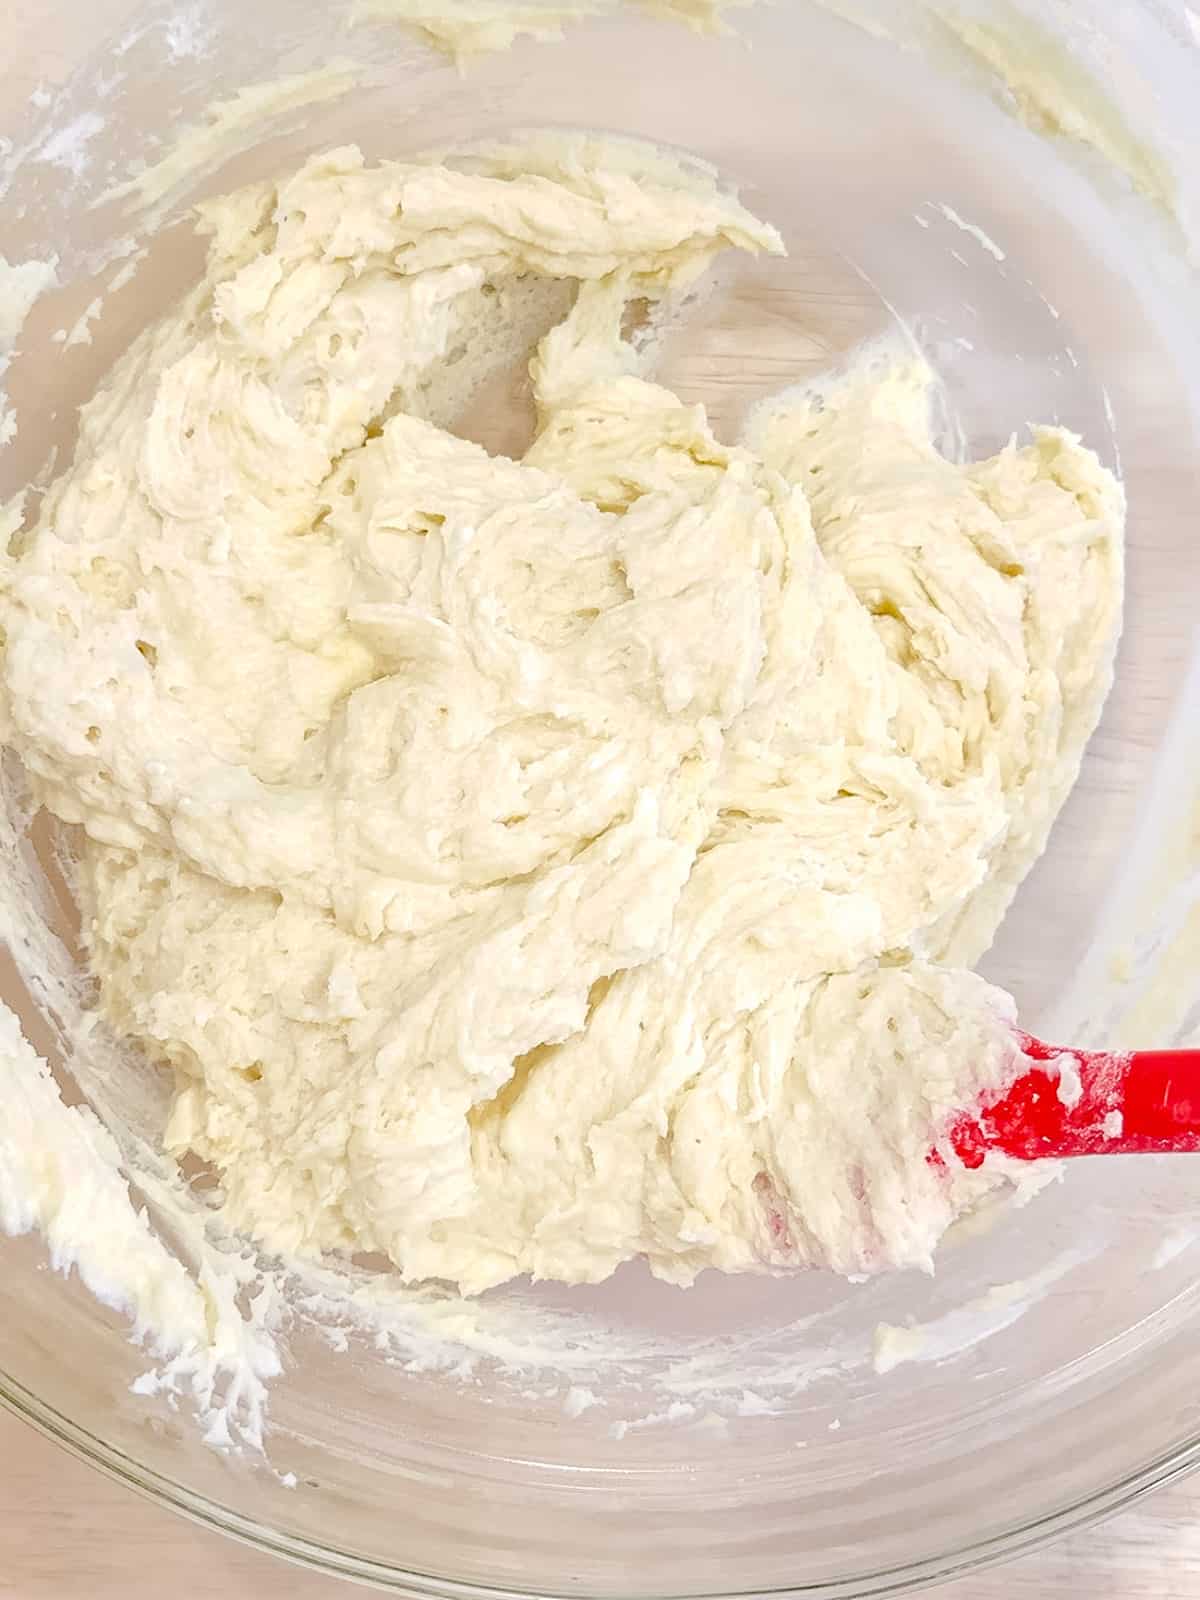 Mixing muffin batter.